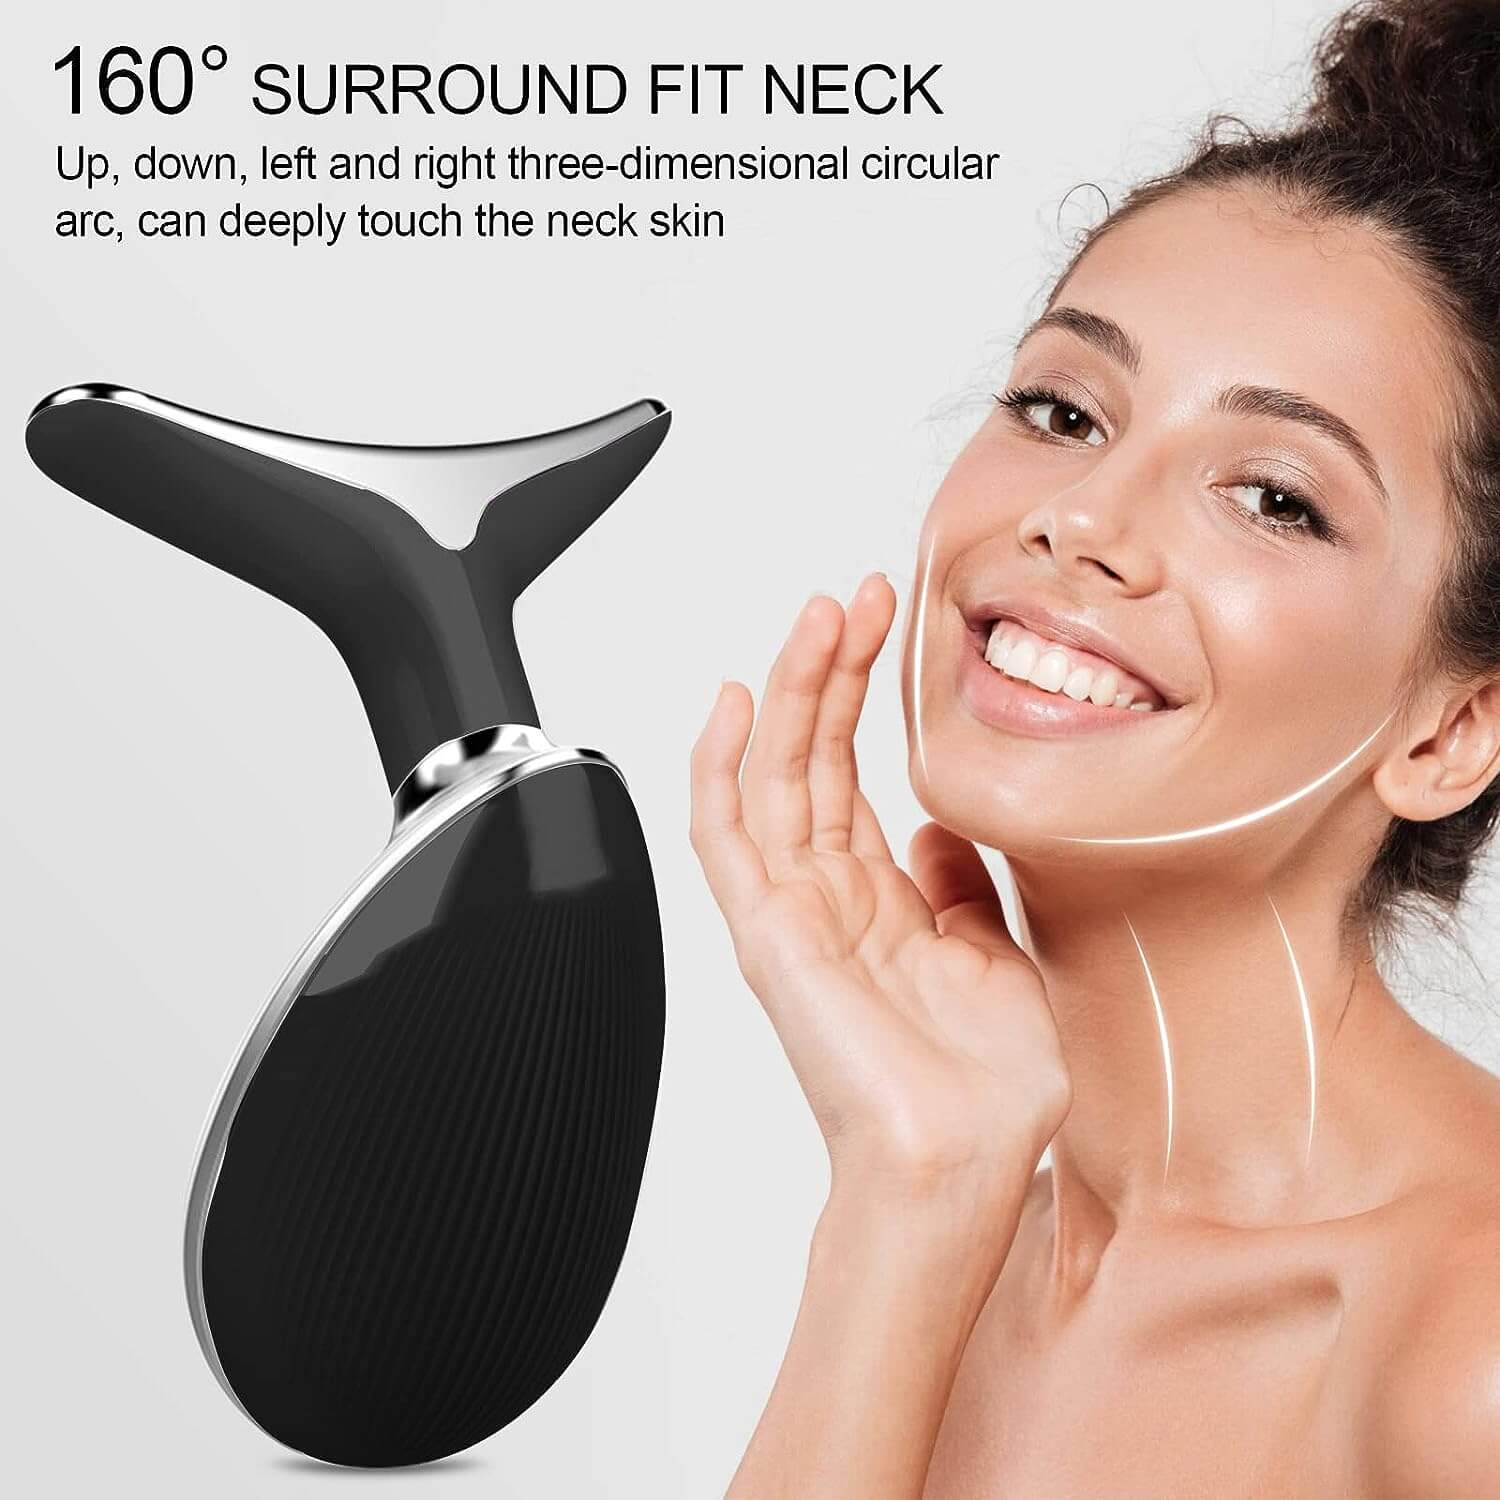 The Black Neck Face Tightening Massager and a model depicting the tools 160 degree facial touch